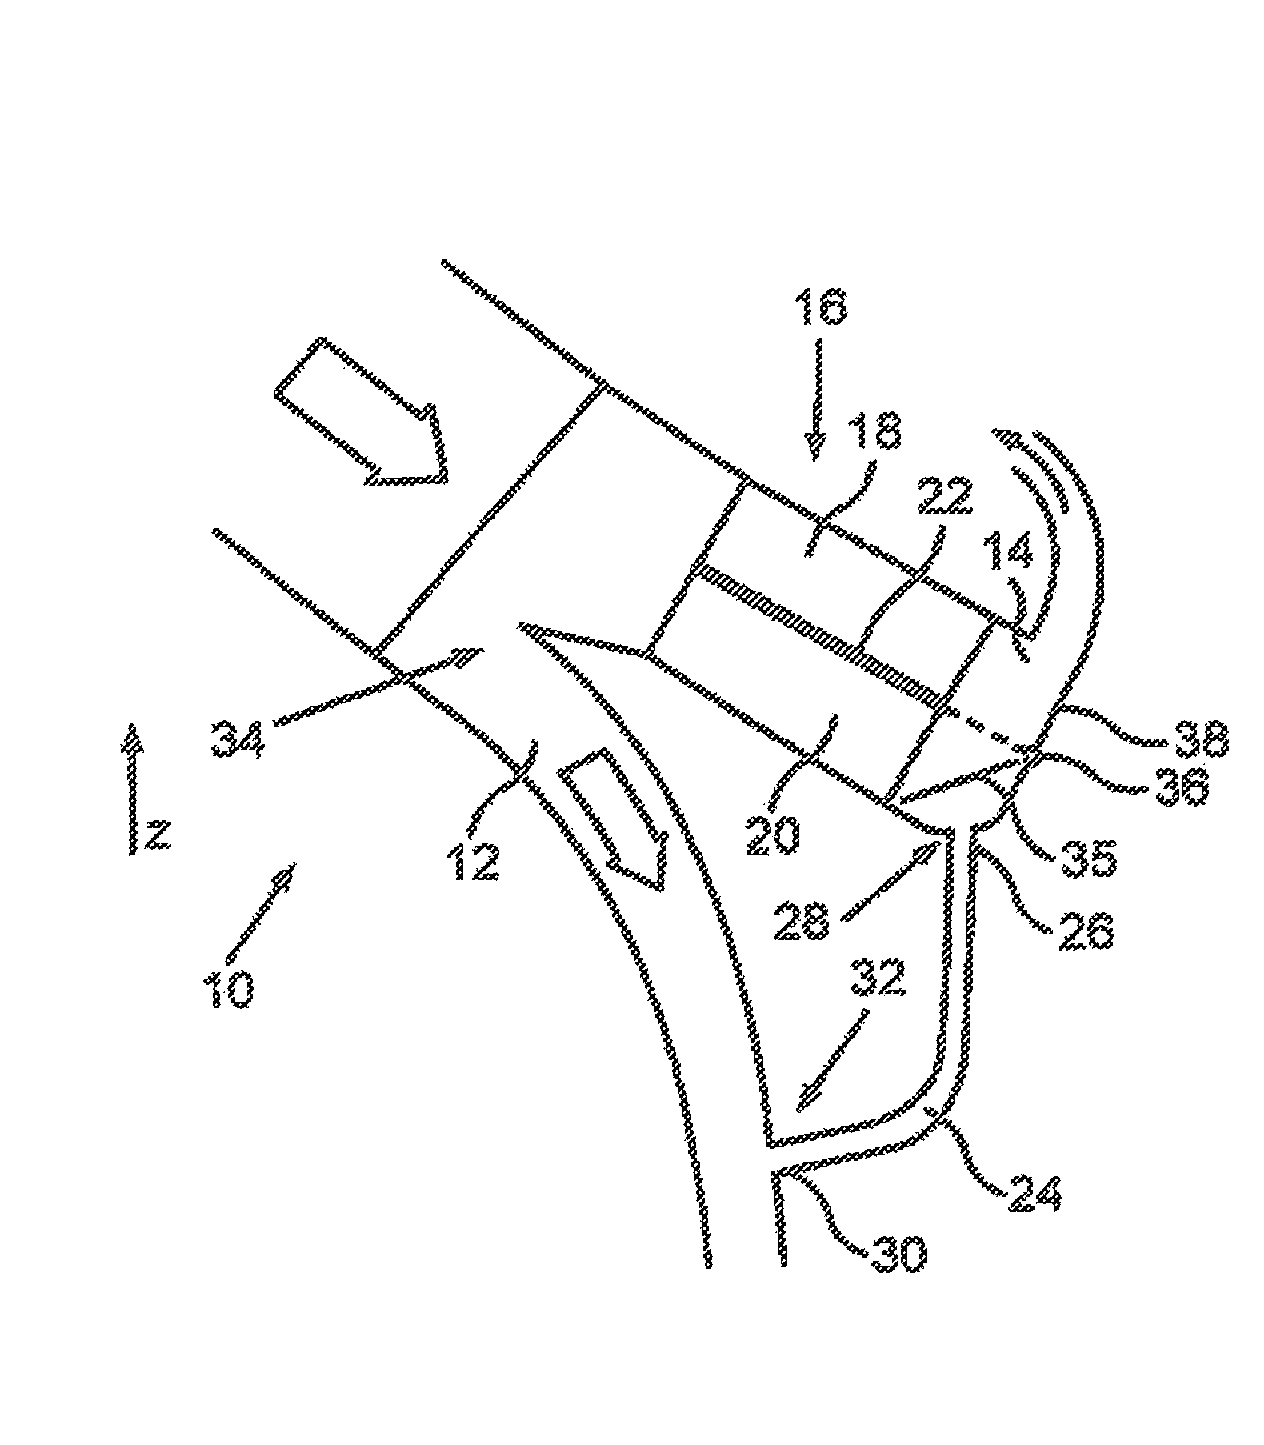 Motor vehicle having an exhaust gas system